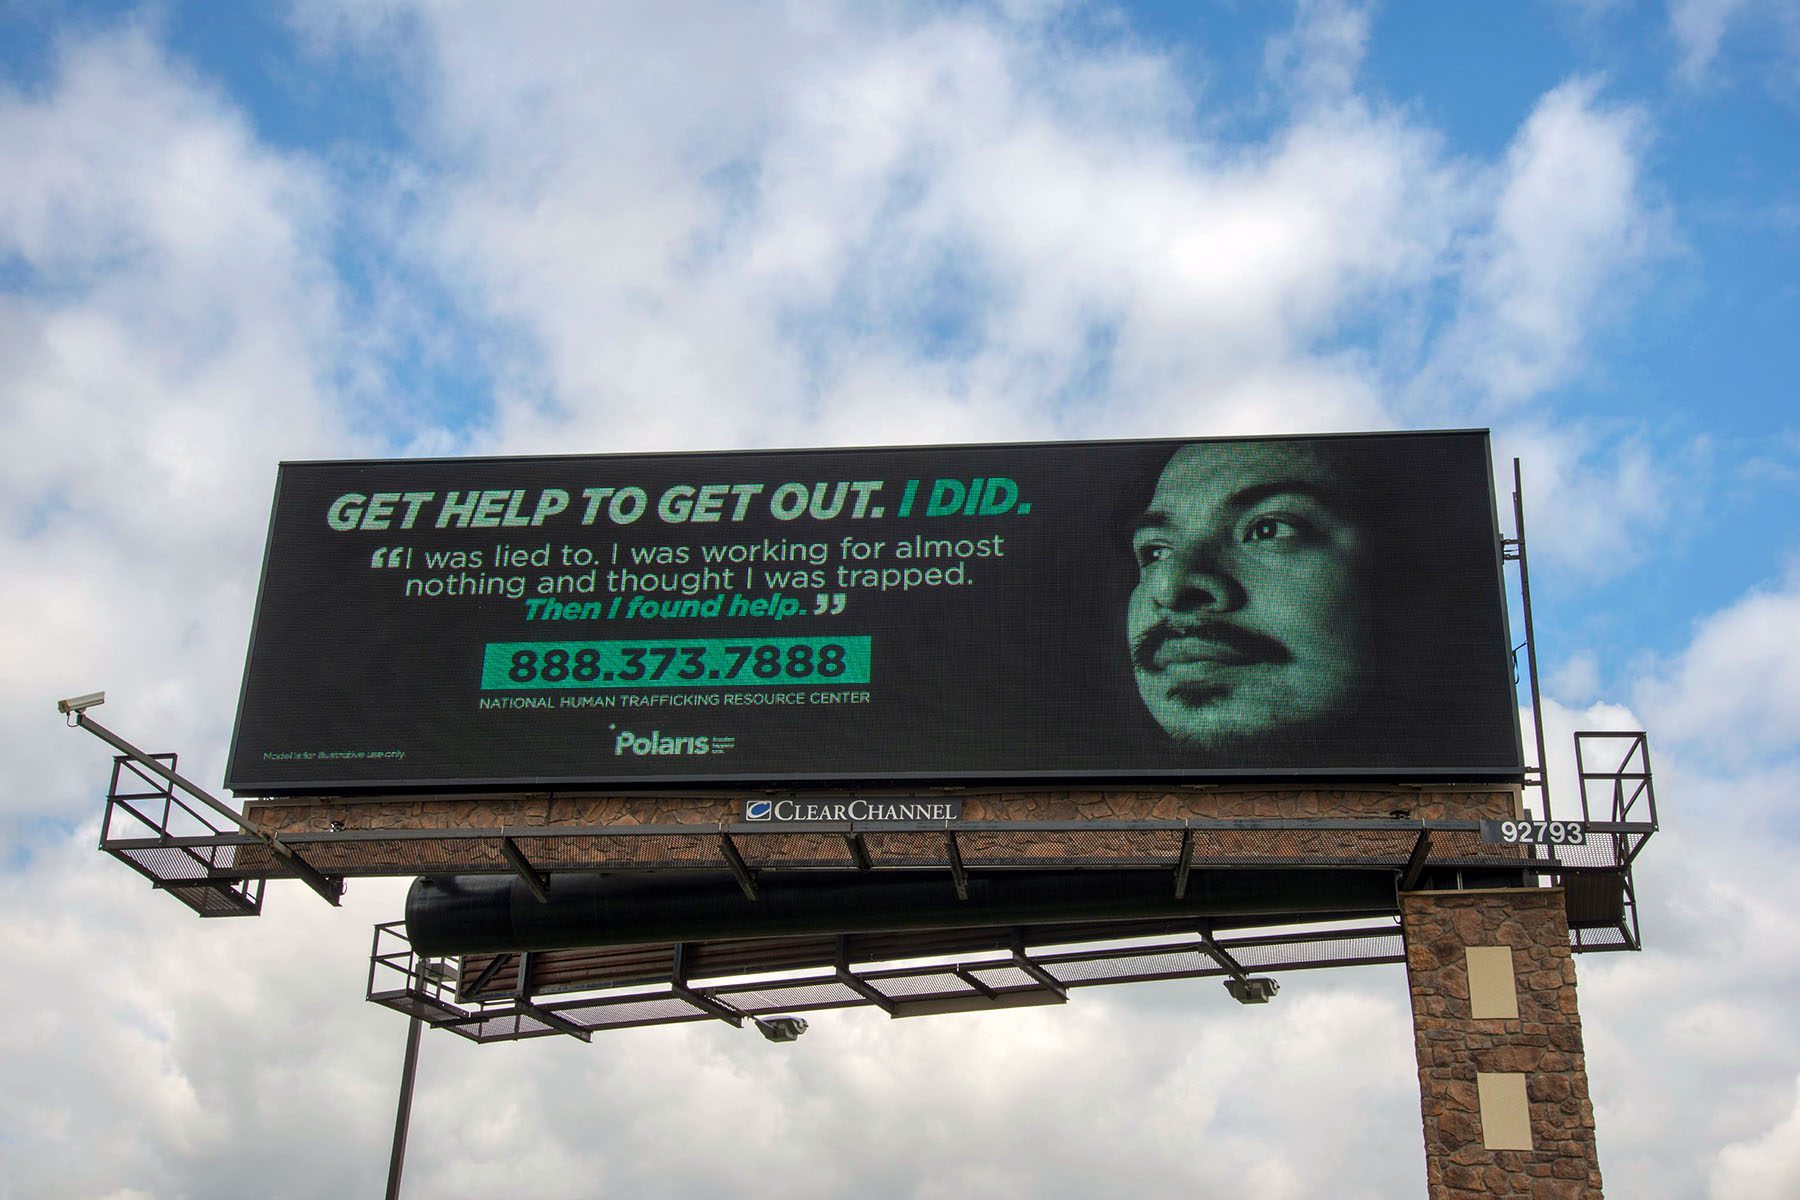 An anti-trafficking billboard reads "Get help to get out. I did." A quote by a survivor reads "I was lied to. I was working for almost nothing and thought I was trapped. Then I found help." The number for the hotline, 888.373.7888, is listed at the bottom of the billboard.